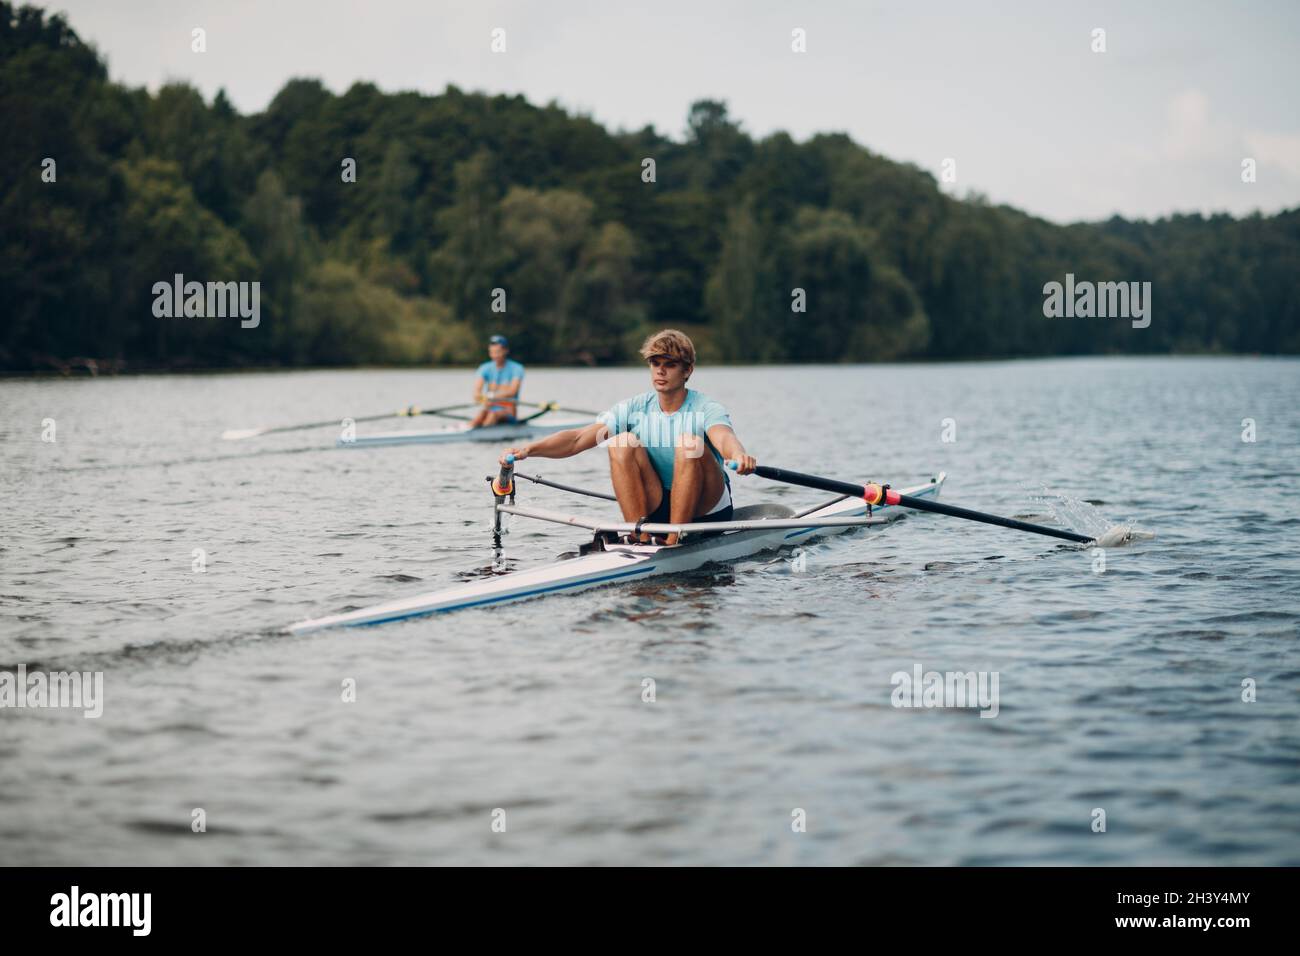 Sportsman single scull man rower rowing on boat Stock Photo